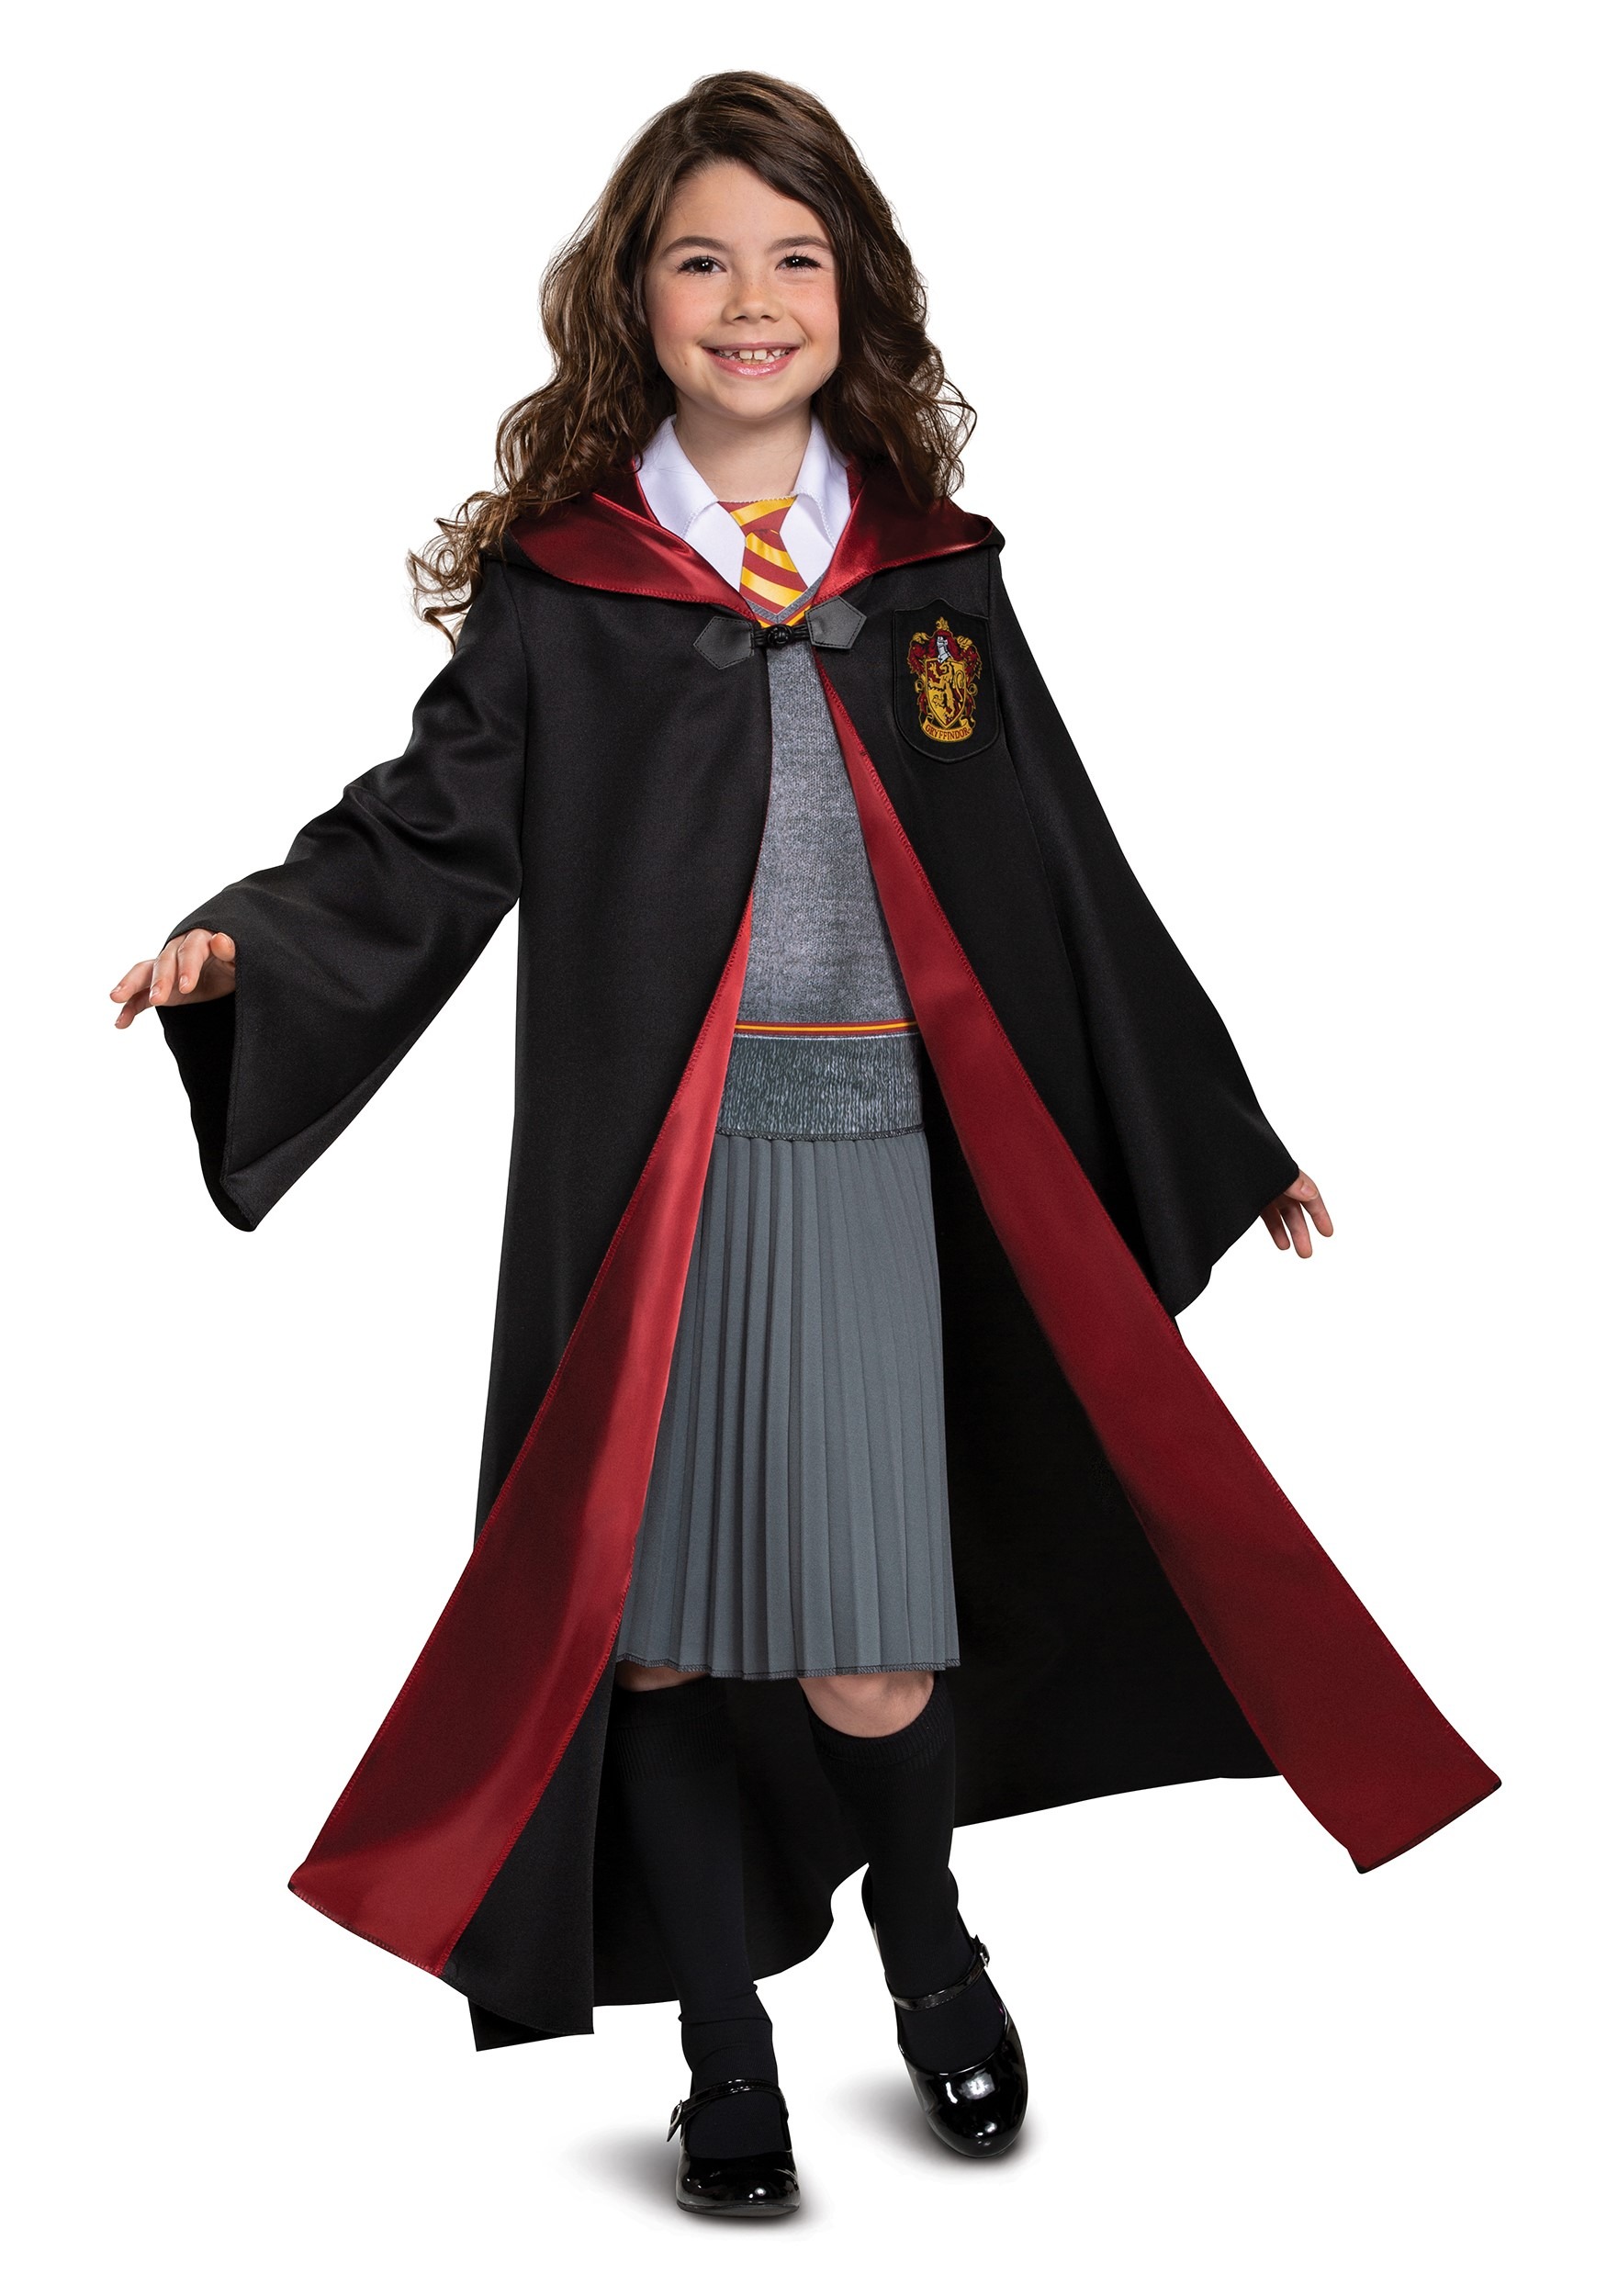 https://images.fun.com/products/66103/1-1/harry-potter-deluxe-kids-hermione-costume.jpg